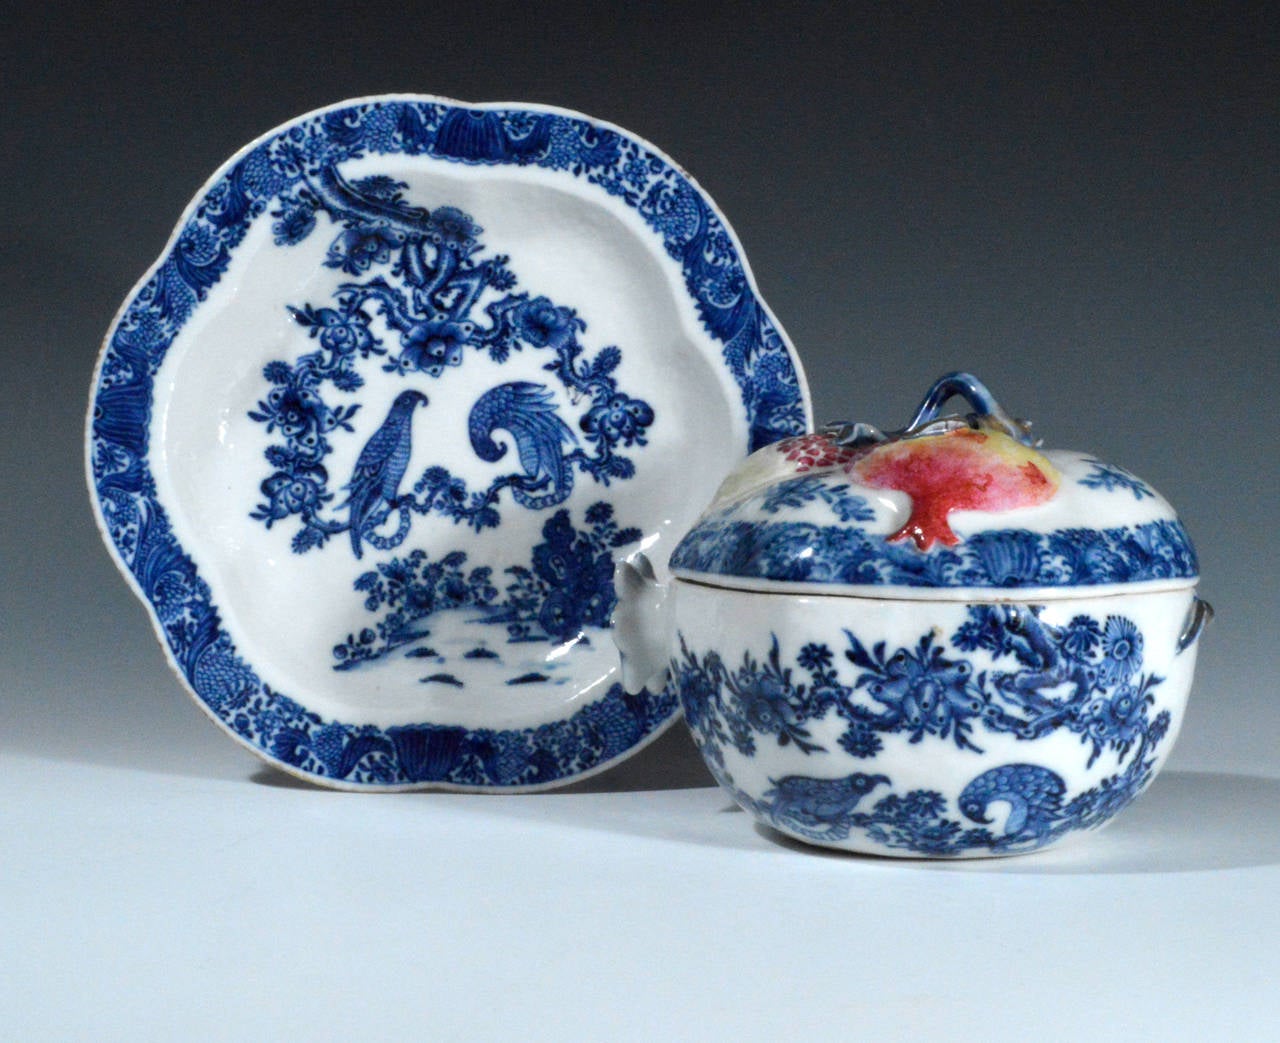 Georgian Pair of Extremely Rare Chinese Export Pomegranate Porcelain Tureens and Stands